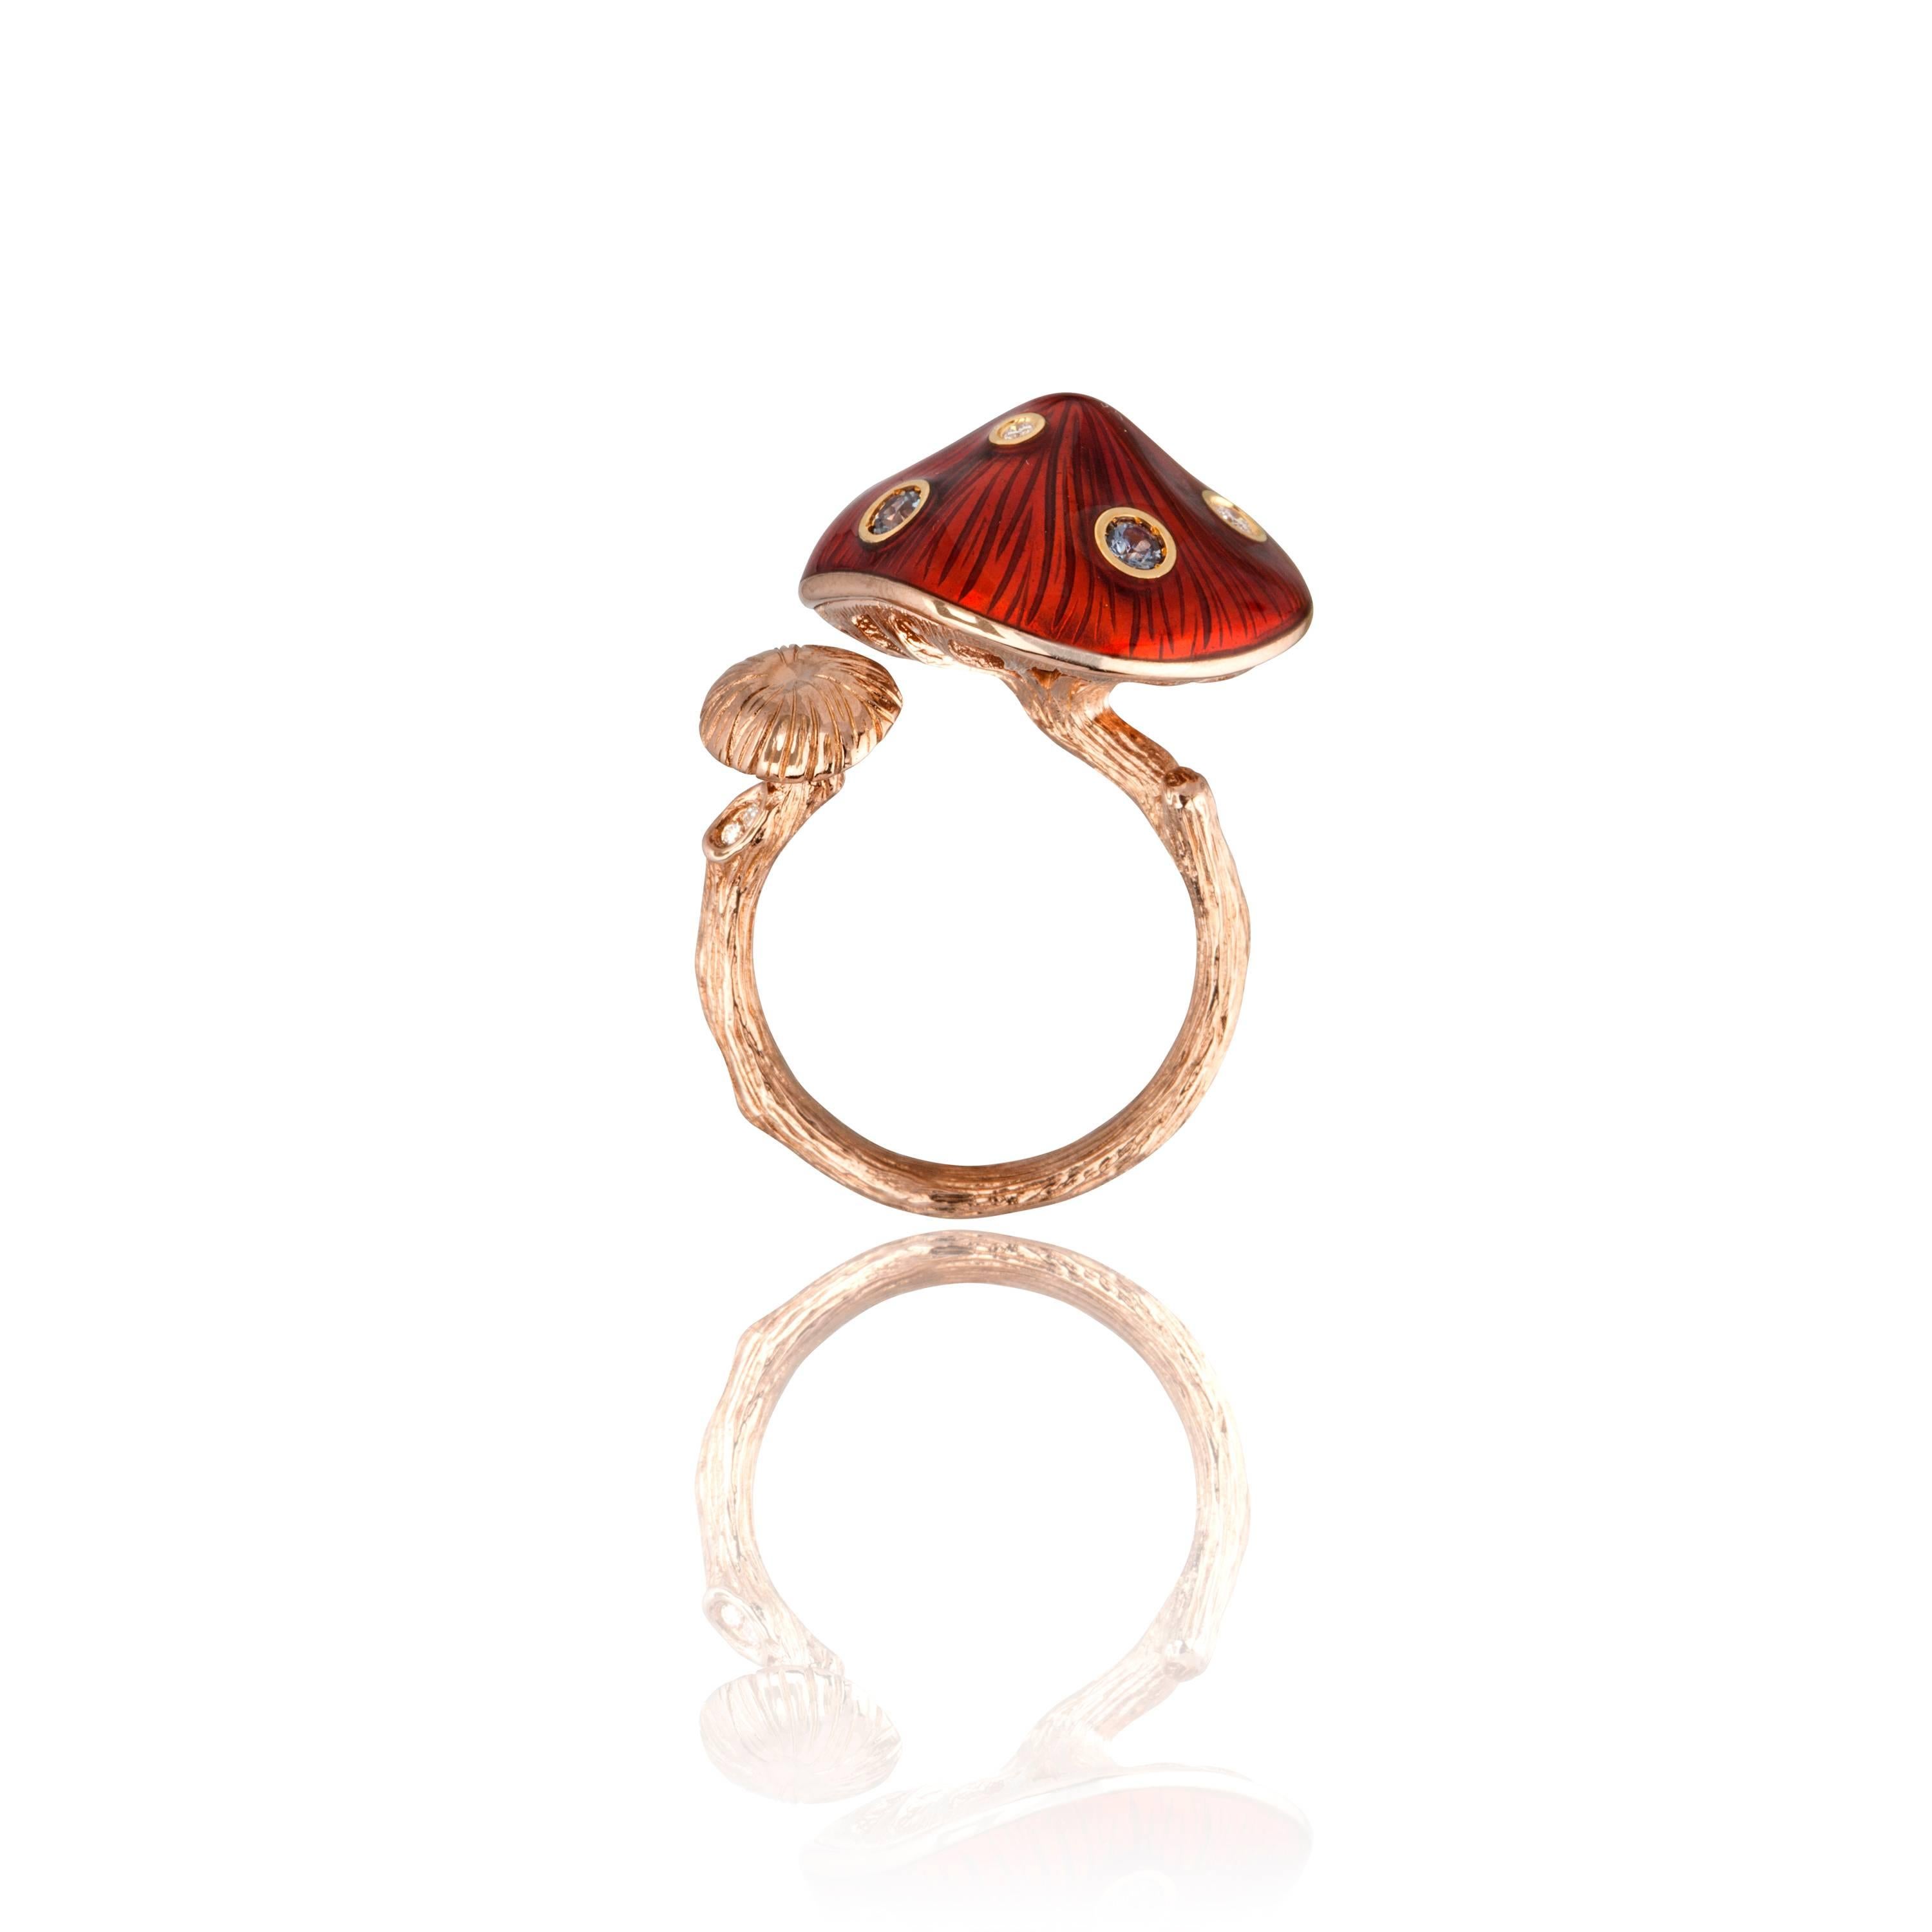 This unique ring in 18K rose gold reimagines the simplicity and humility of a toadstool. Red hot enamel creates a luscious shine while fine diamonds refract light, and a bold colour change garnet gives a sense of magical and playfulness as it